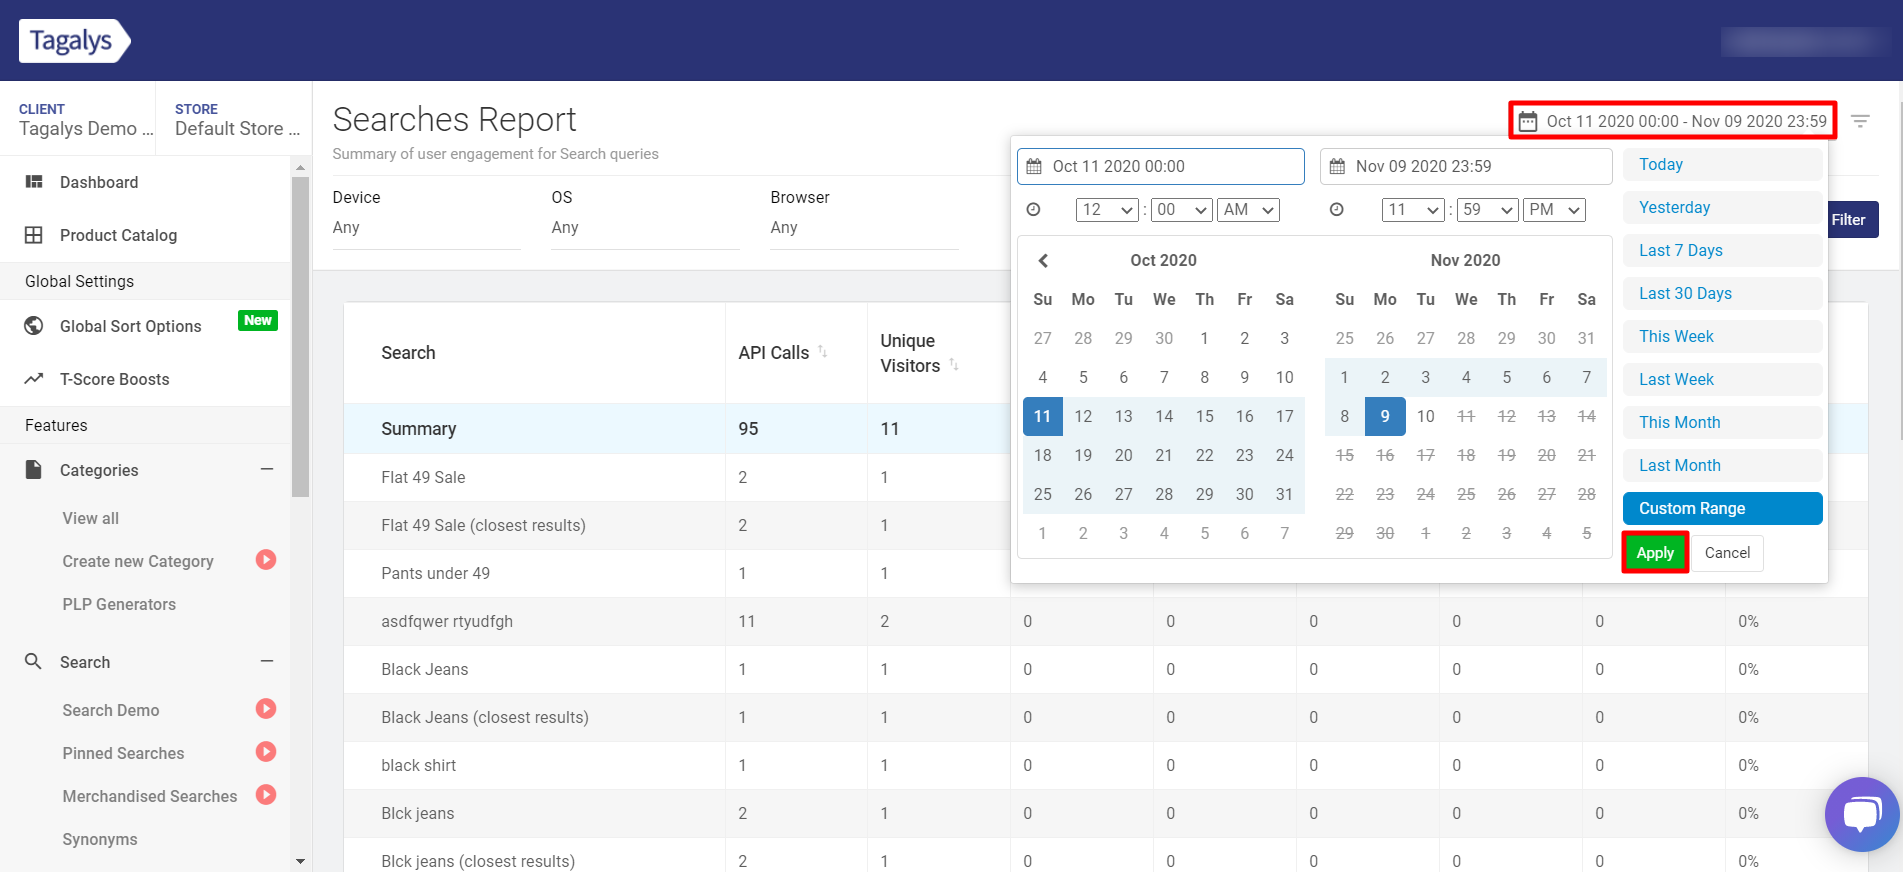 Download reports from Tagalys Dashboard